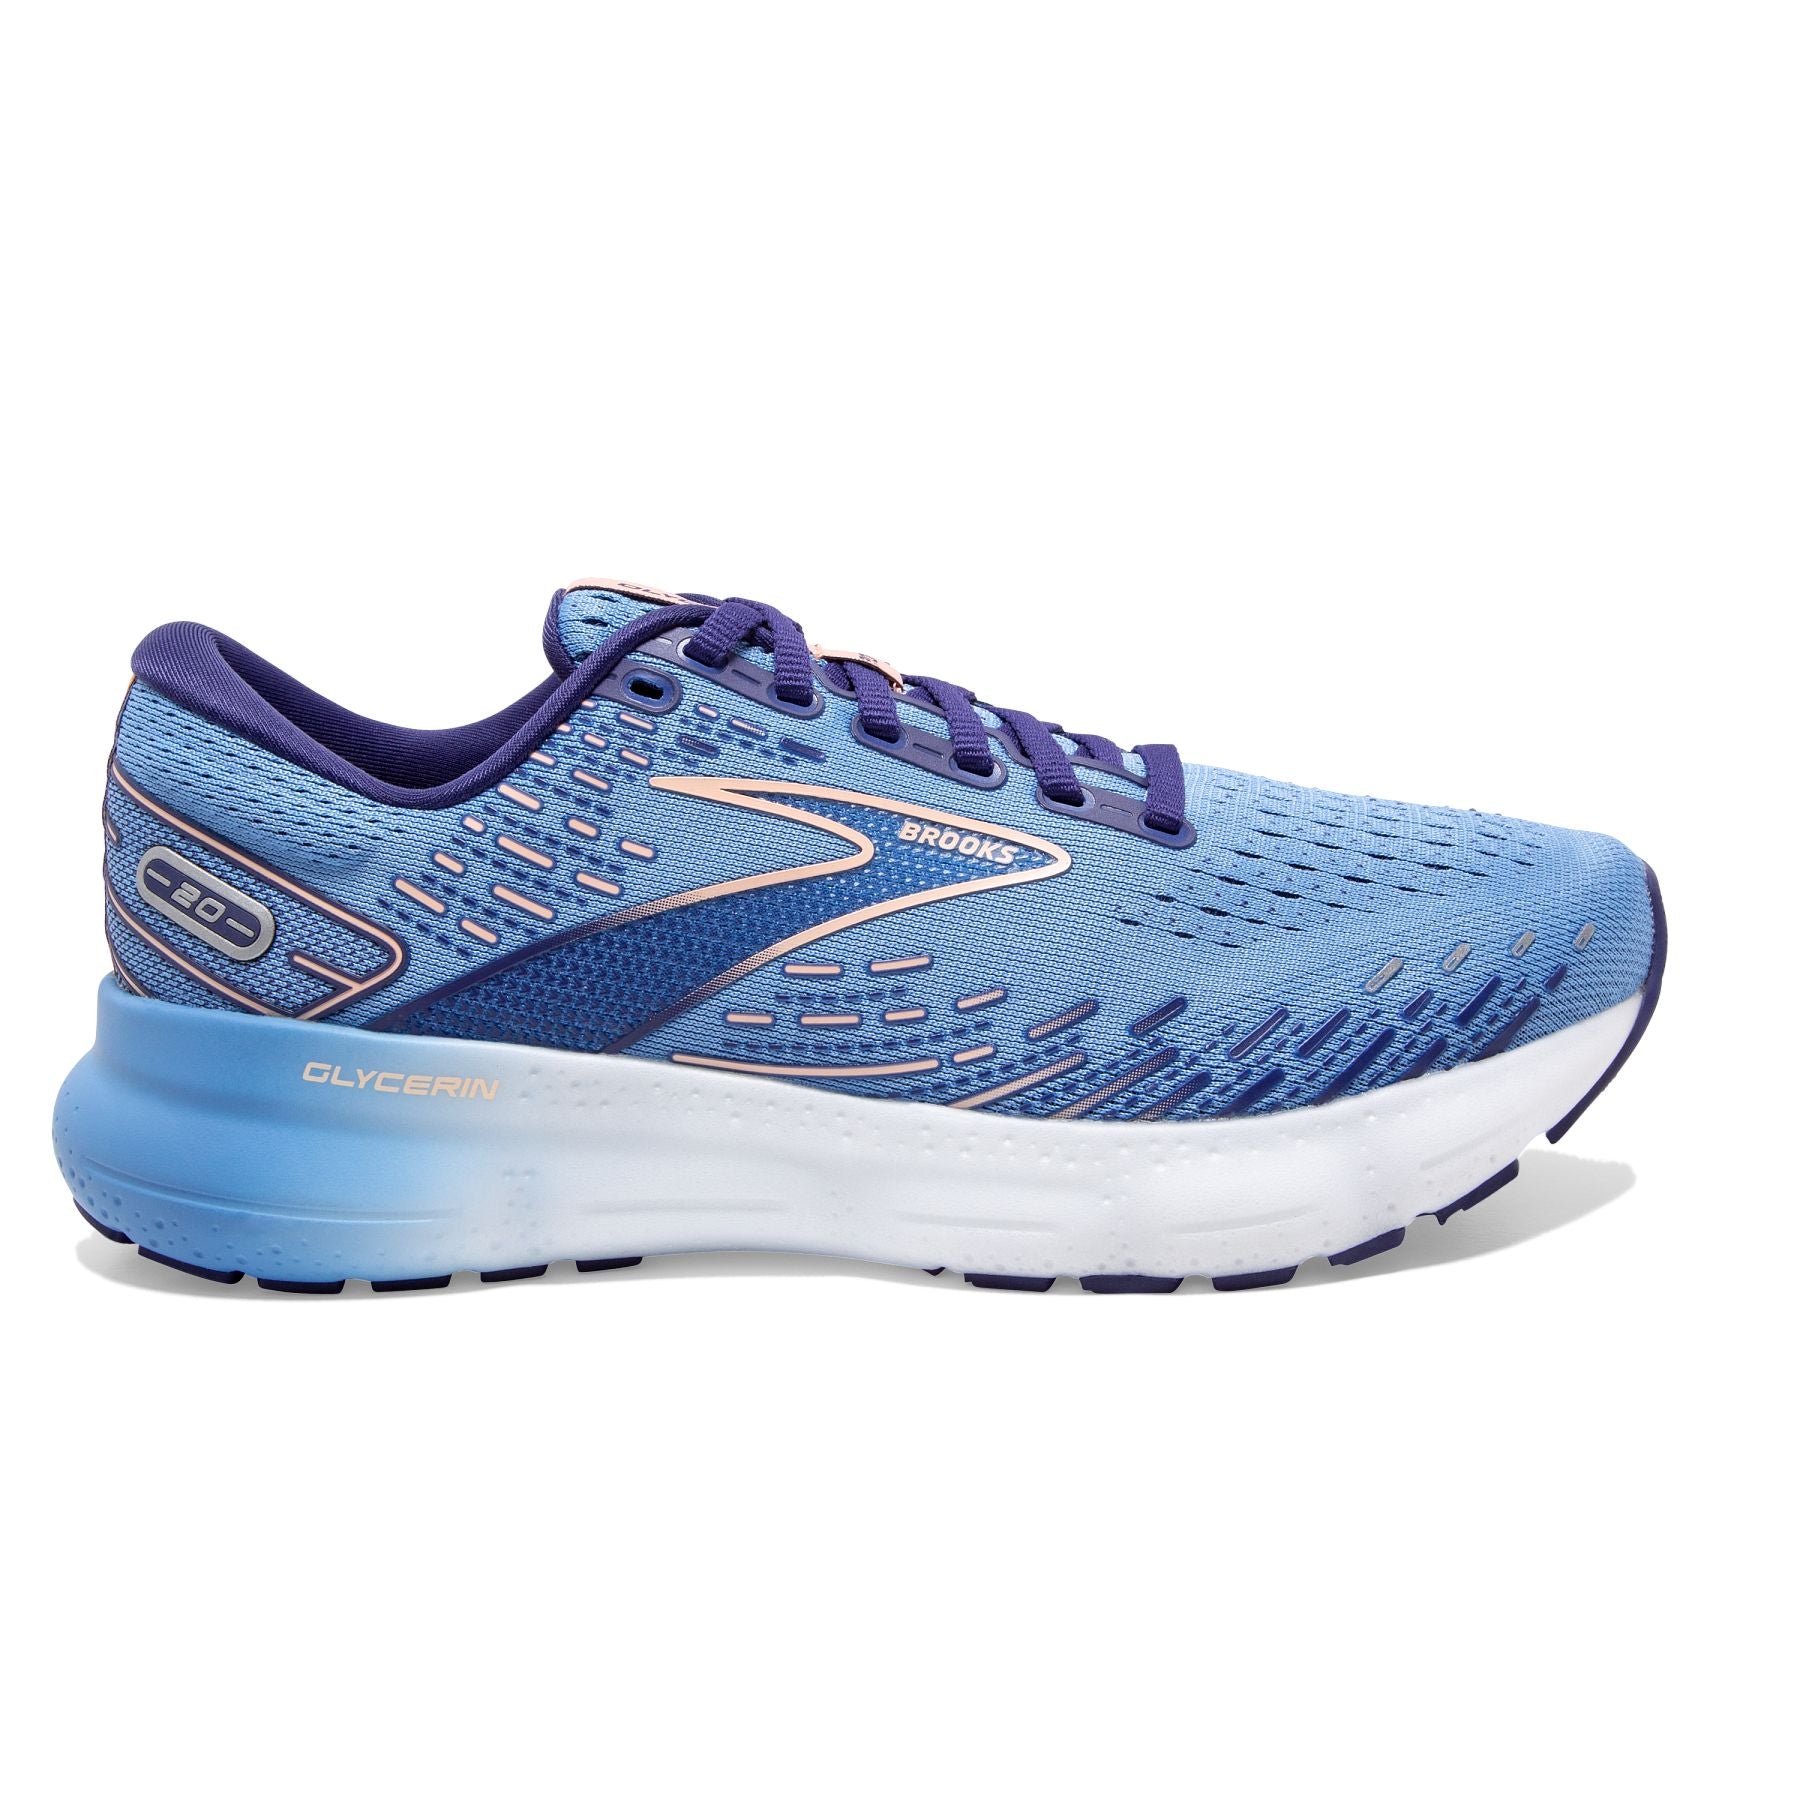 Lateral view of the Women's Glycerin 20 in Blissful Blue/Peach/White